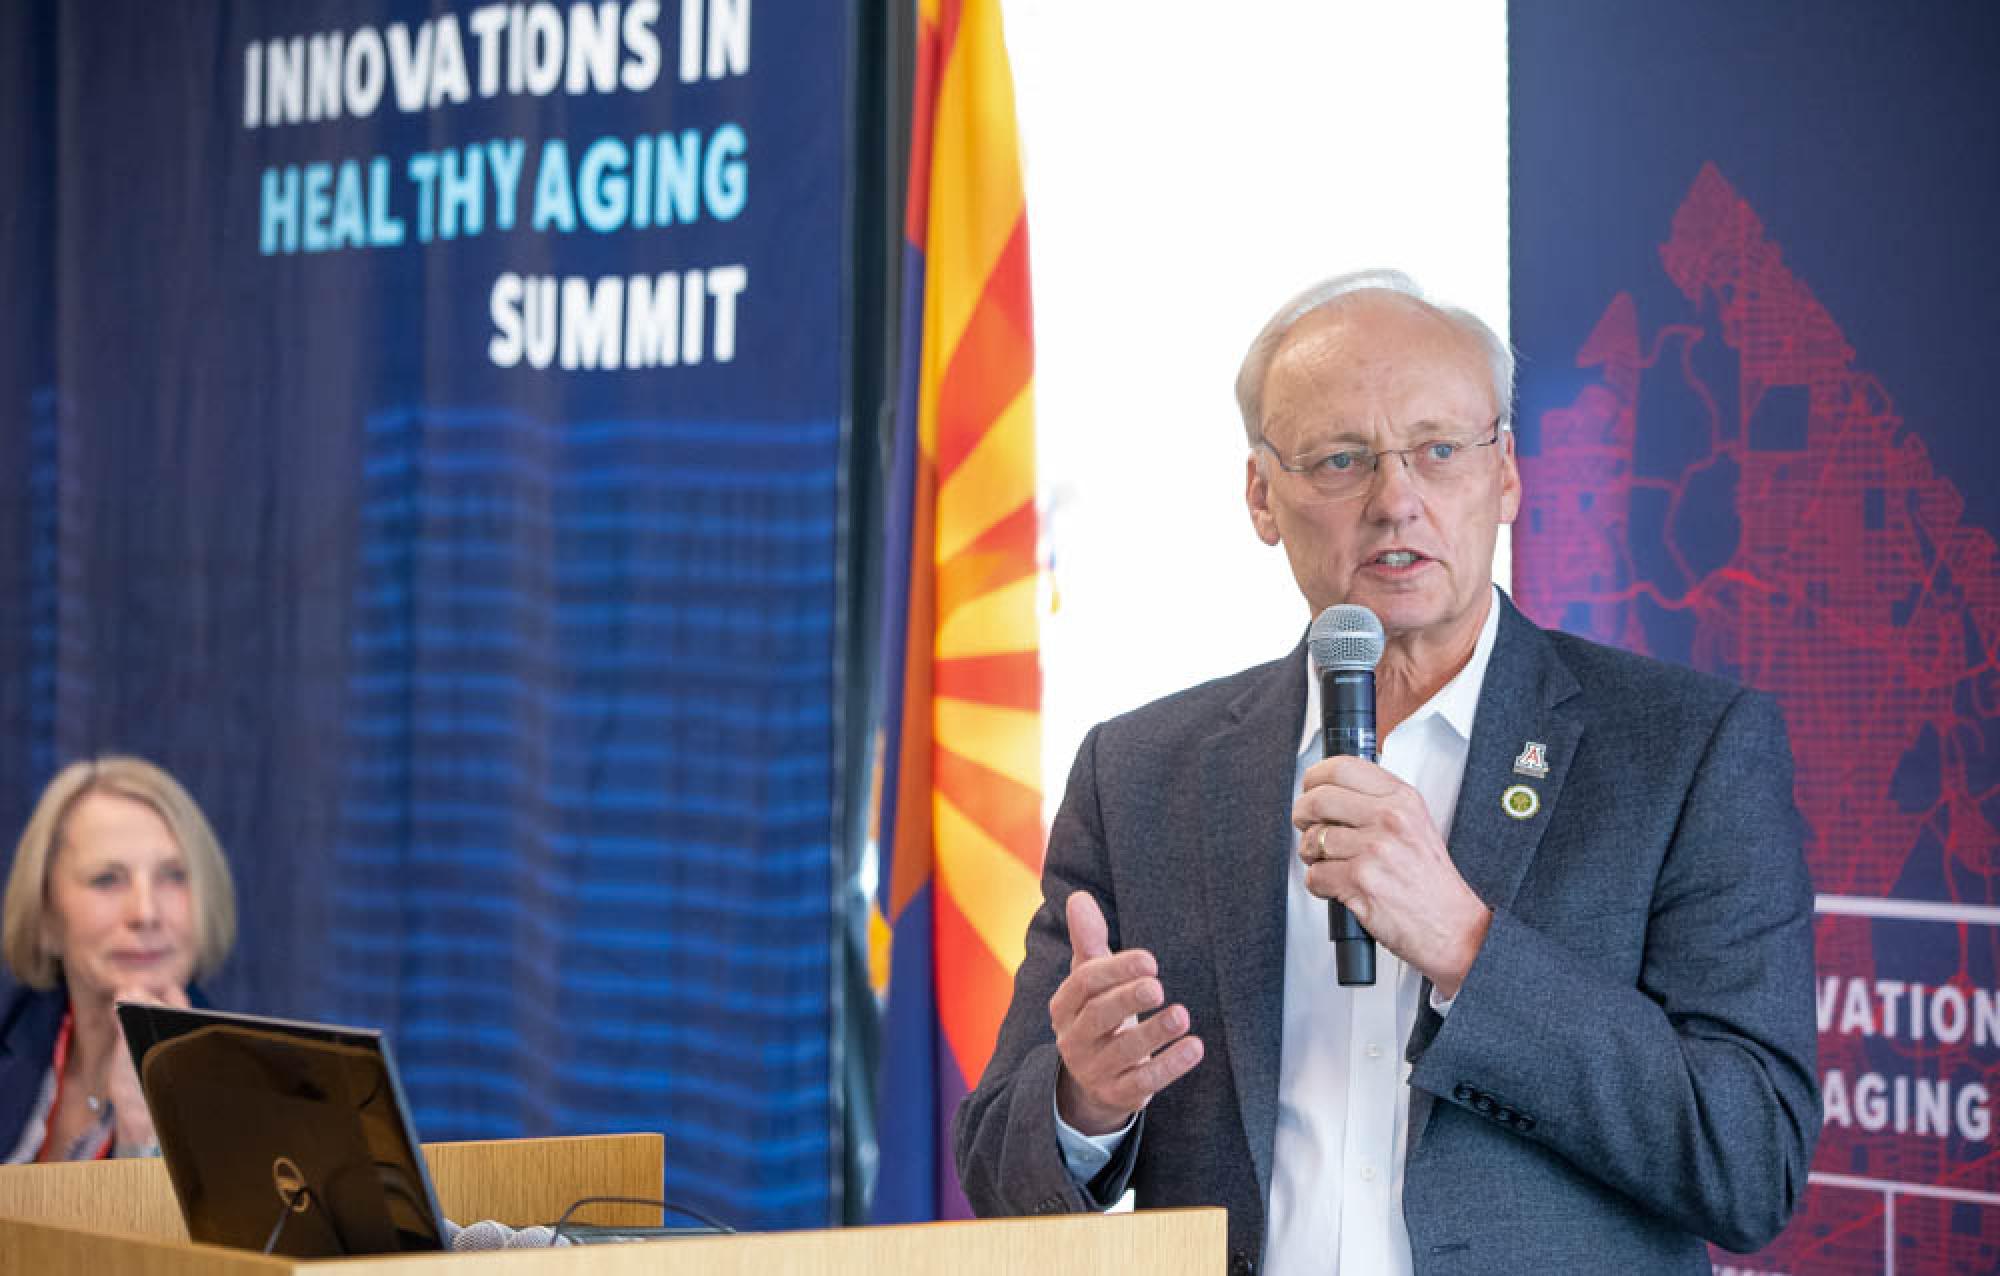 An older man wearing glasses and a suit speaks into a microphone at a podium in front of banners that say &quot;Innovations in Healthy Aging Summit.&quot;